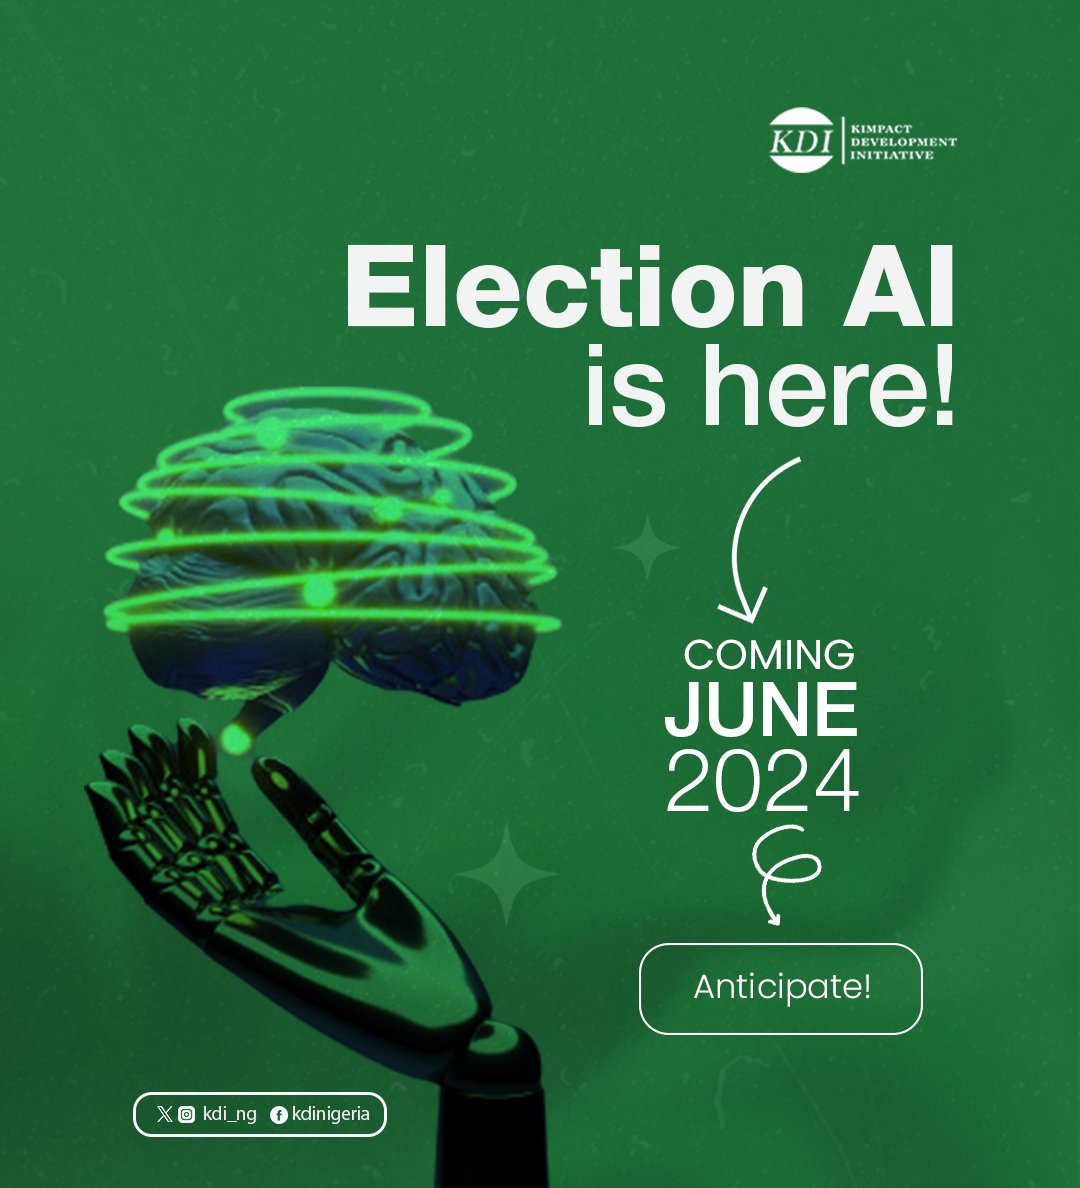 For the past few months, the @KDI_ng team has been working on an AI innovation that will enhance an increased citizens participation in elections. Stay tuned for more intriguing updates on the power of AI in democratic elections in Nigeria Anticipate! #Innovation #AIForTheFuture